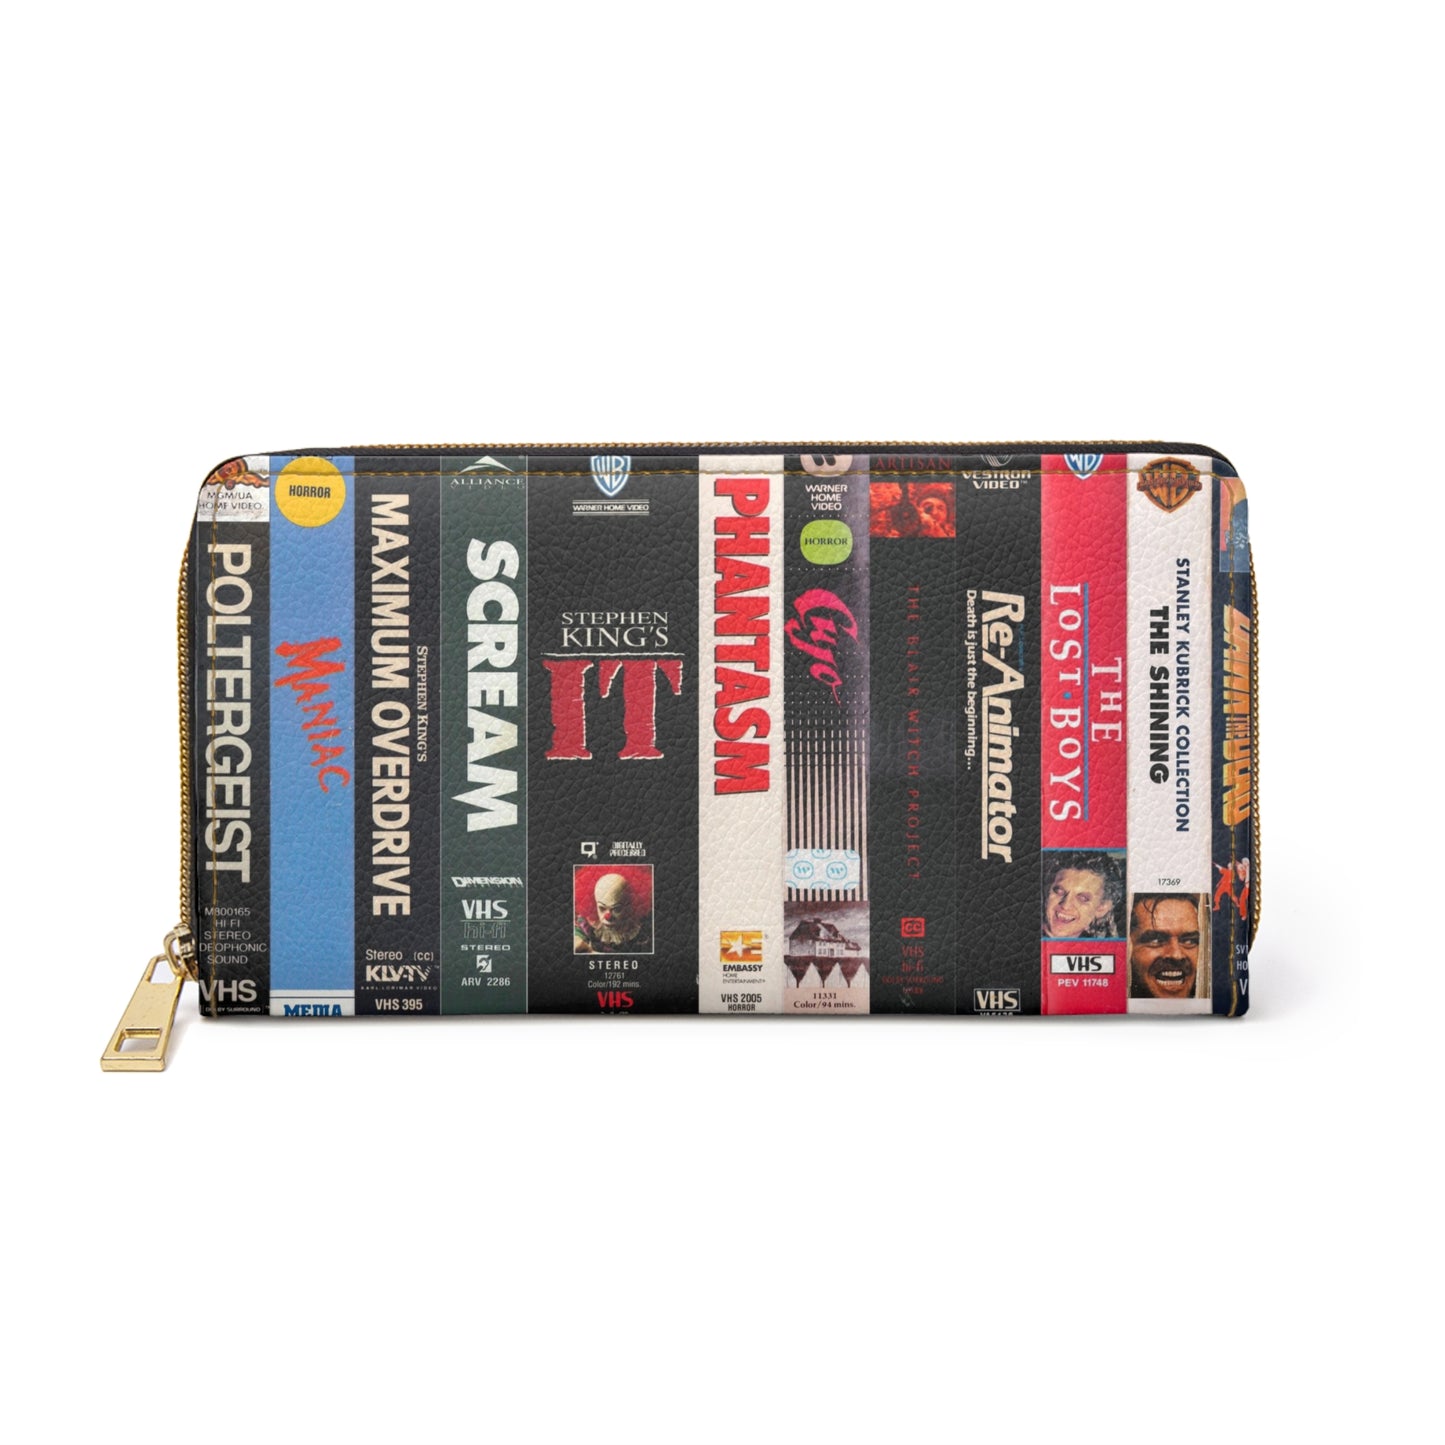 VHS Collection Wallet